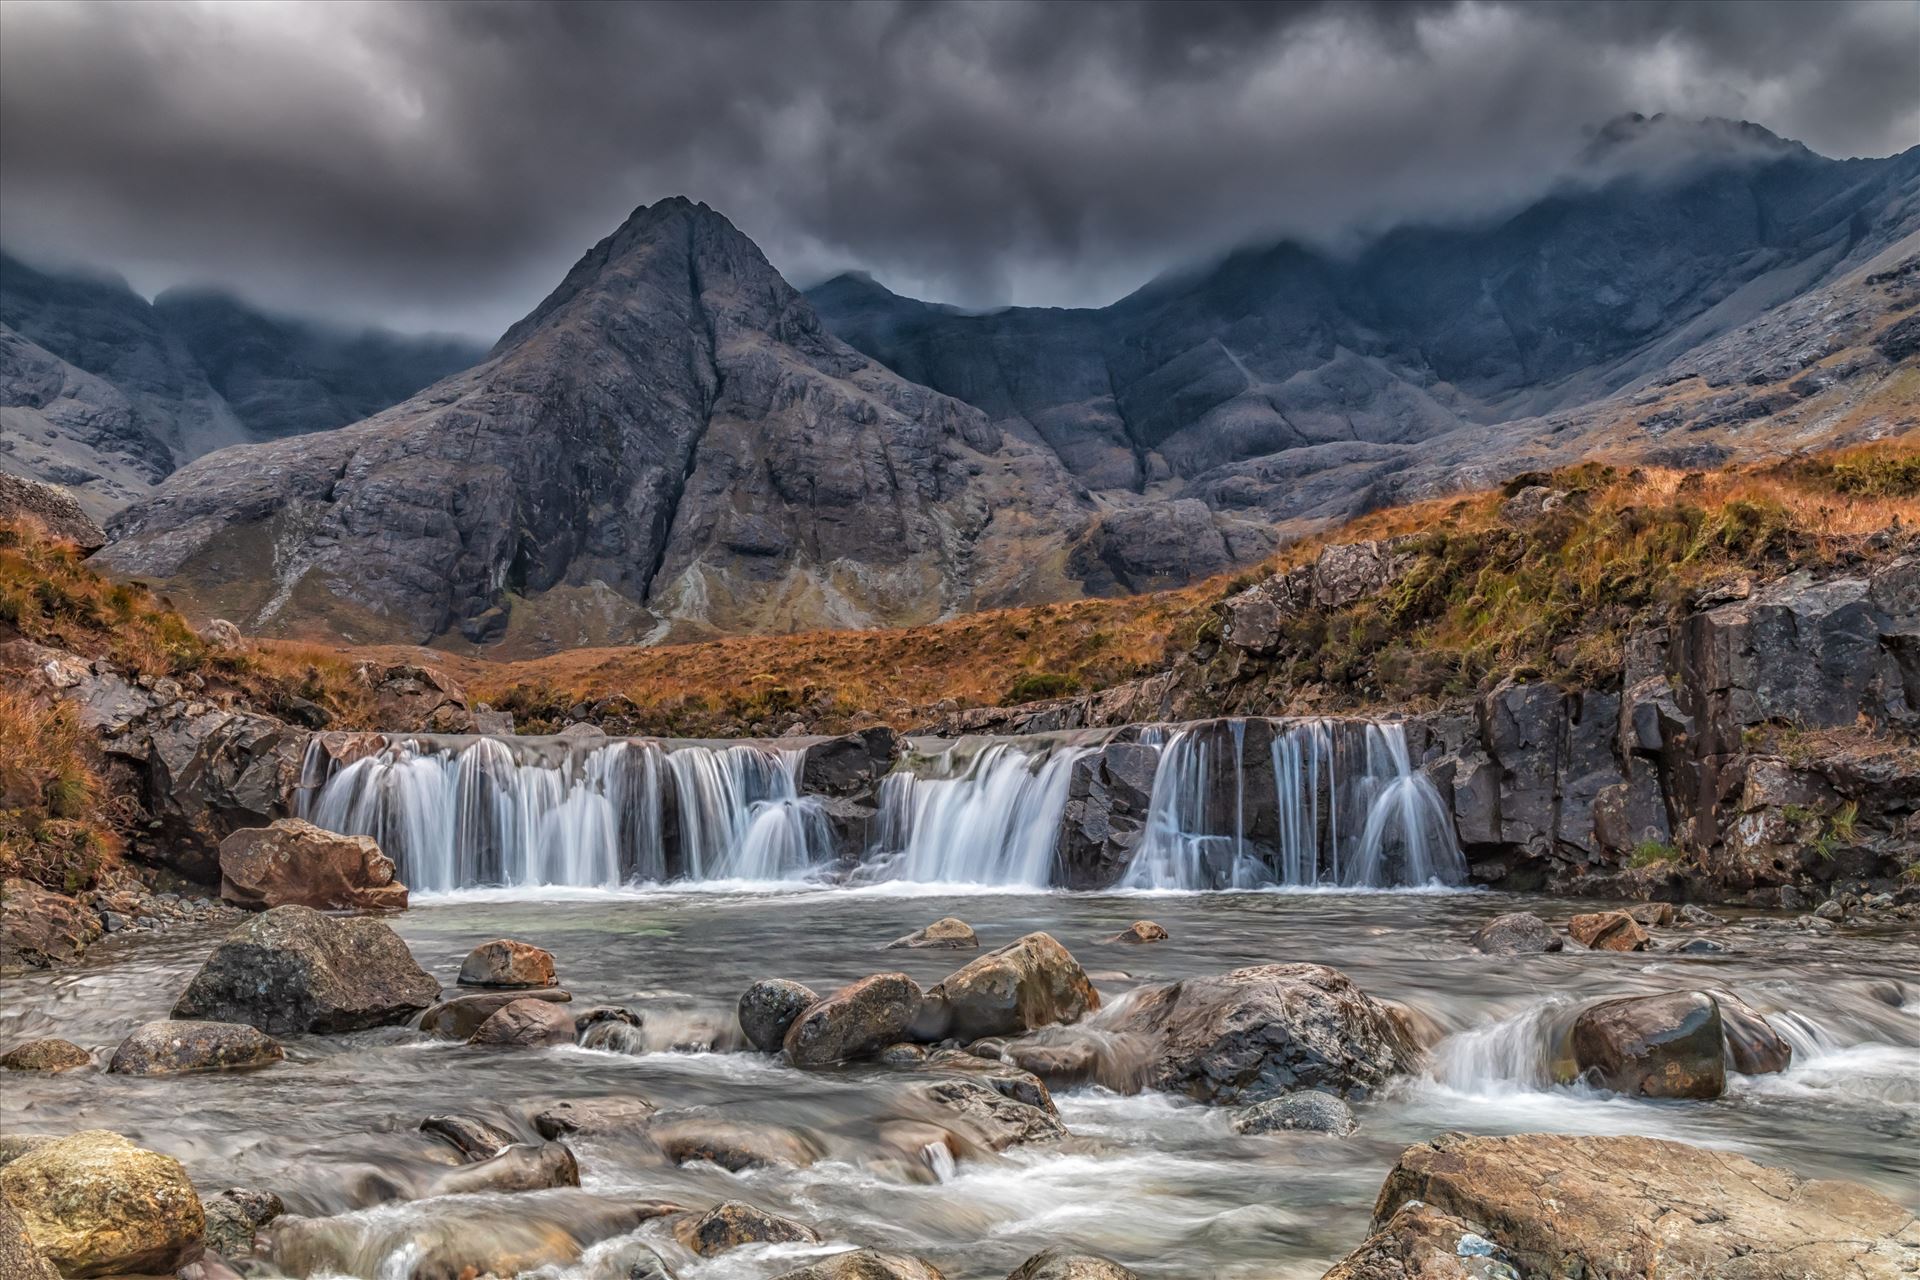 The Fairy Pools, Skye - The Fairy Pools are a natural waterfall phenomenon in Glen Brittle on the Allt Coir' a' Mhadaidh river on the Isle of Skye. by philreay